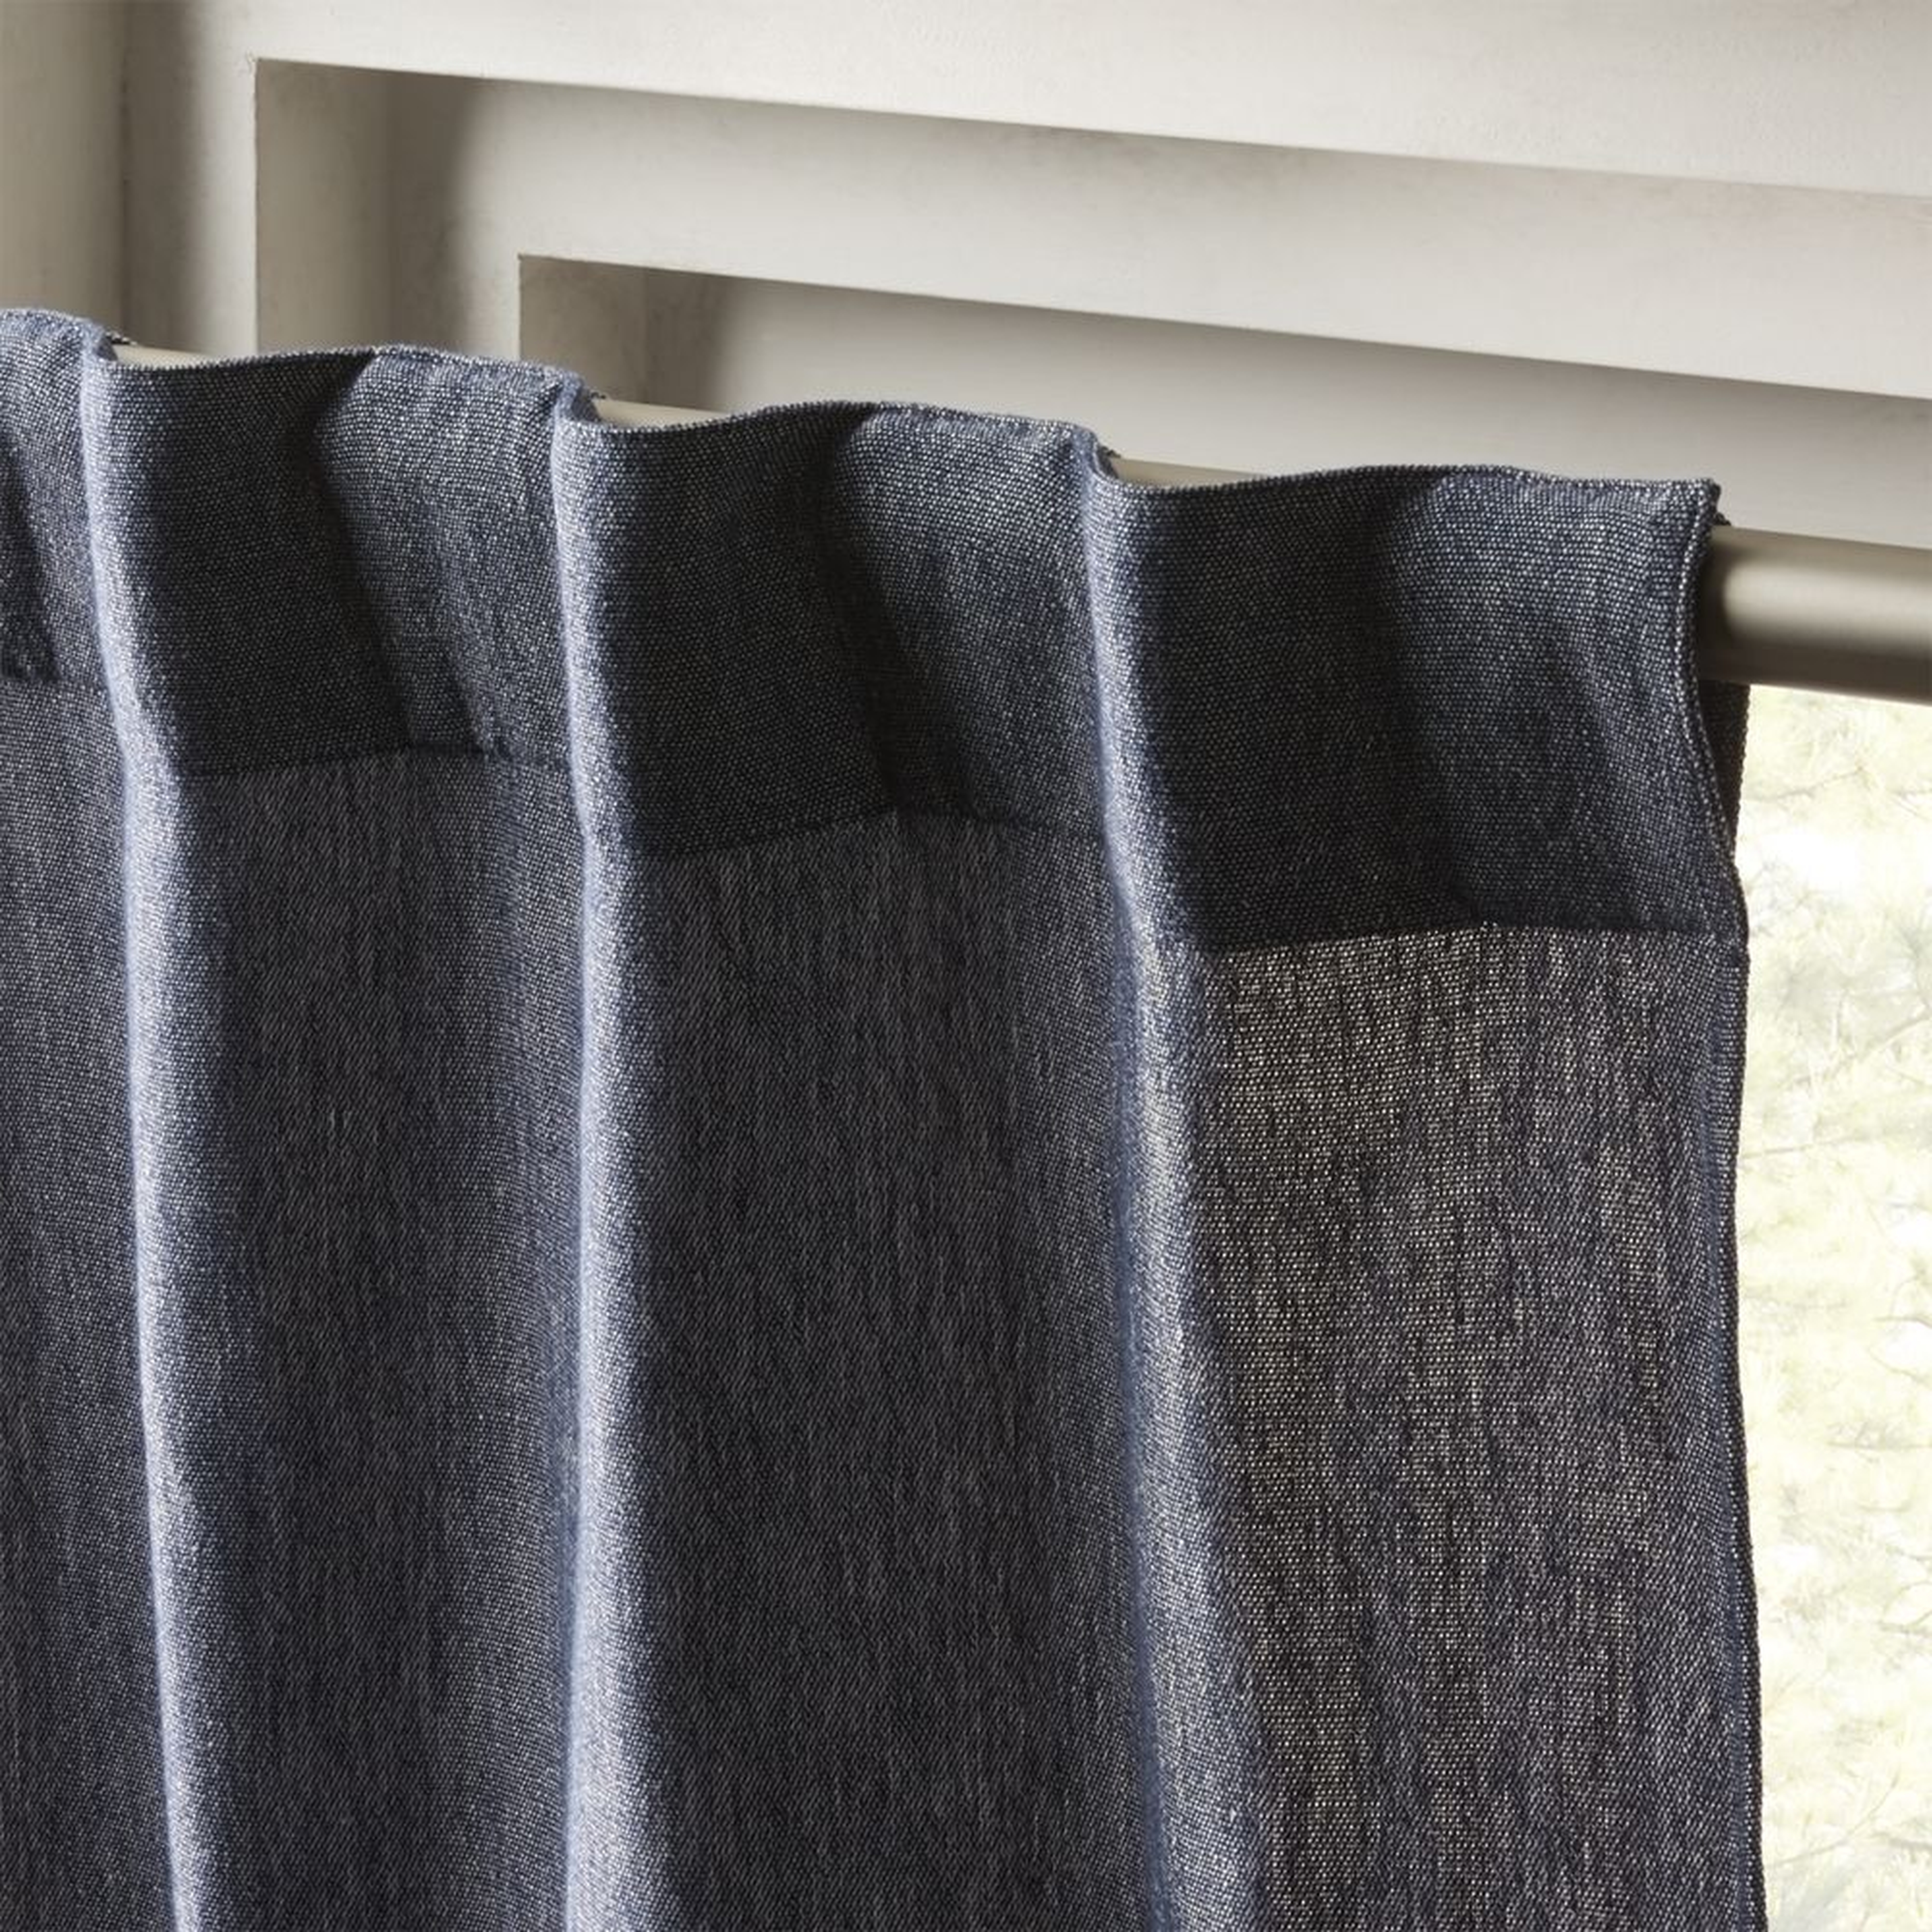 "Weekendr Blue Chambray Curtain Panel 48""x84""" - CB2